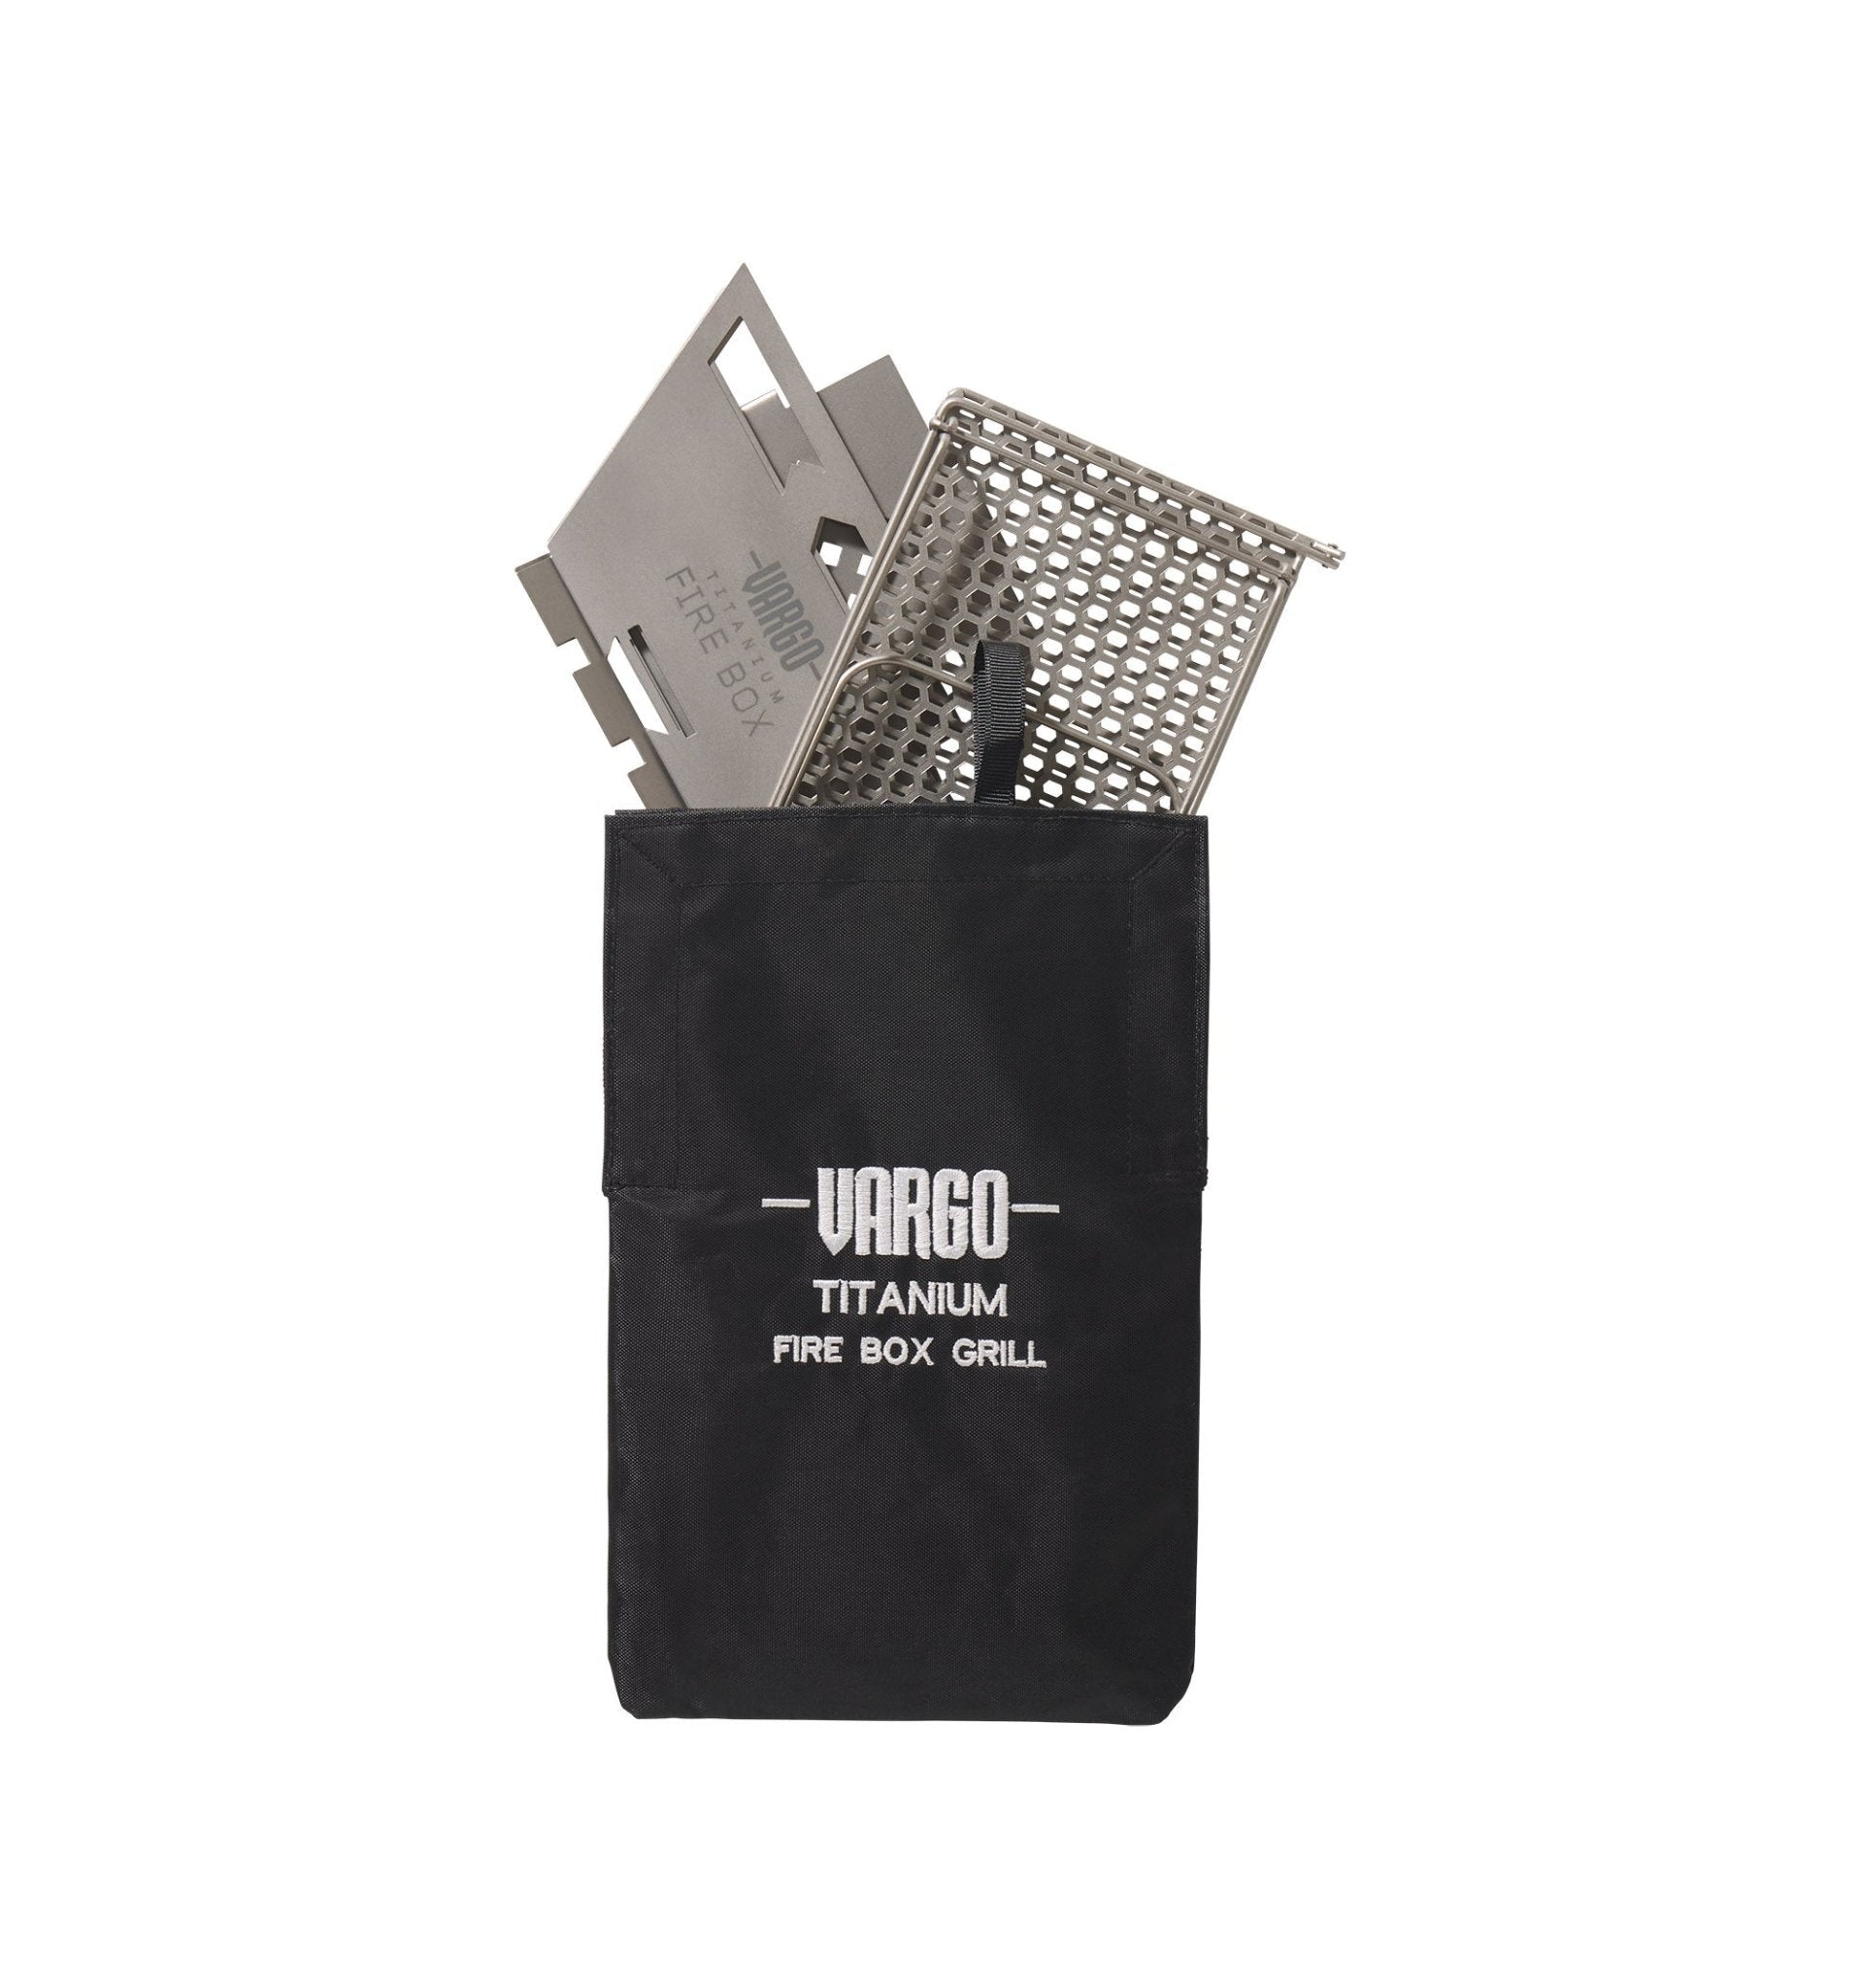 VARGO - TITANIUM FIRE BOX GRILL 2.0 - Angler's Pro Tackle & Outdoors